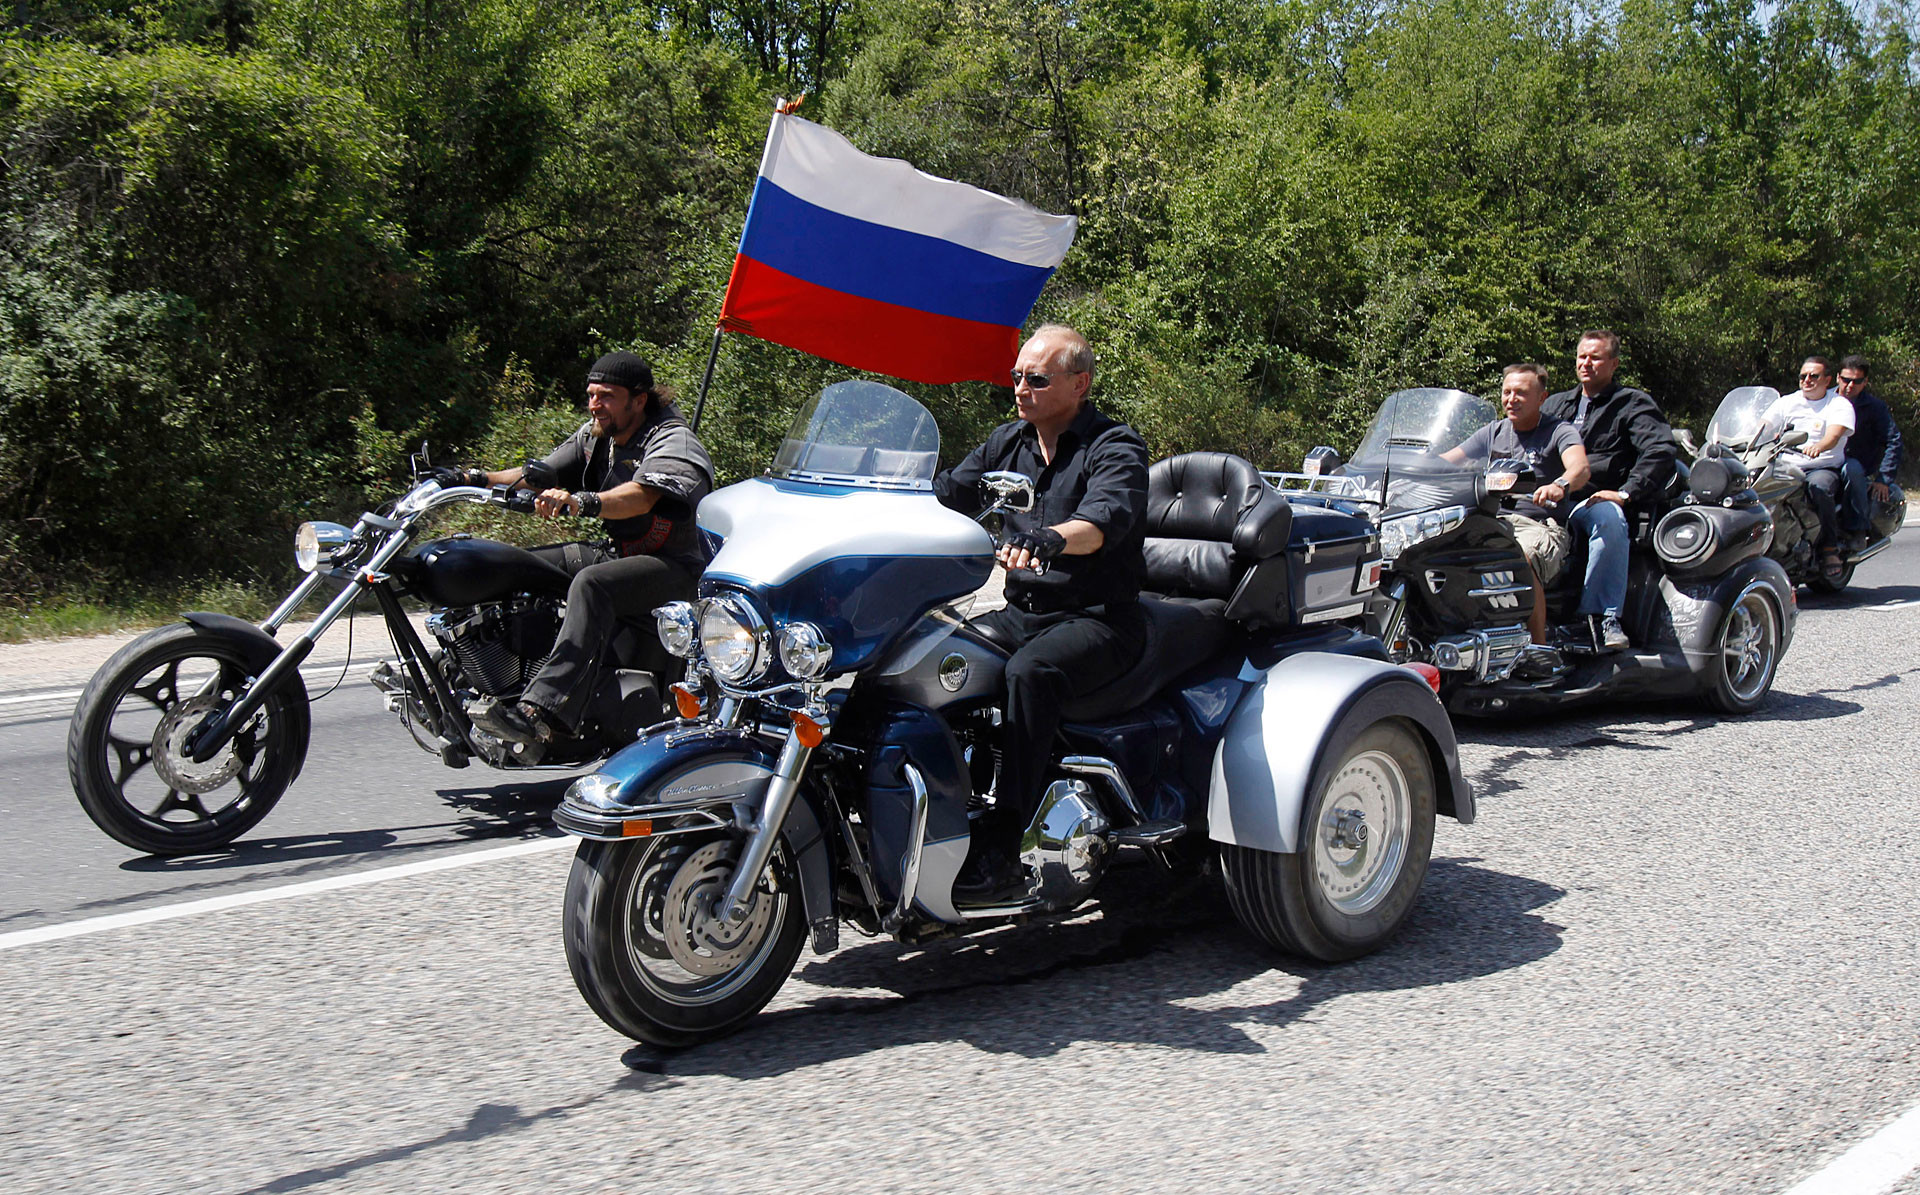 Vladimir Putin rides a Harley Davidson Lehman Trike as he arrives for a meeting with Russian and Ukrainian bikers.